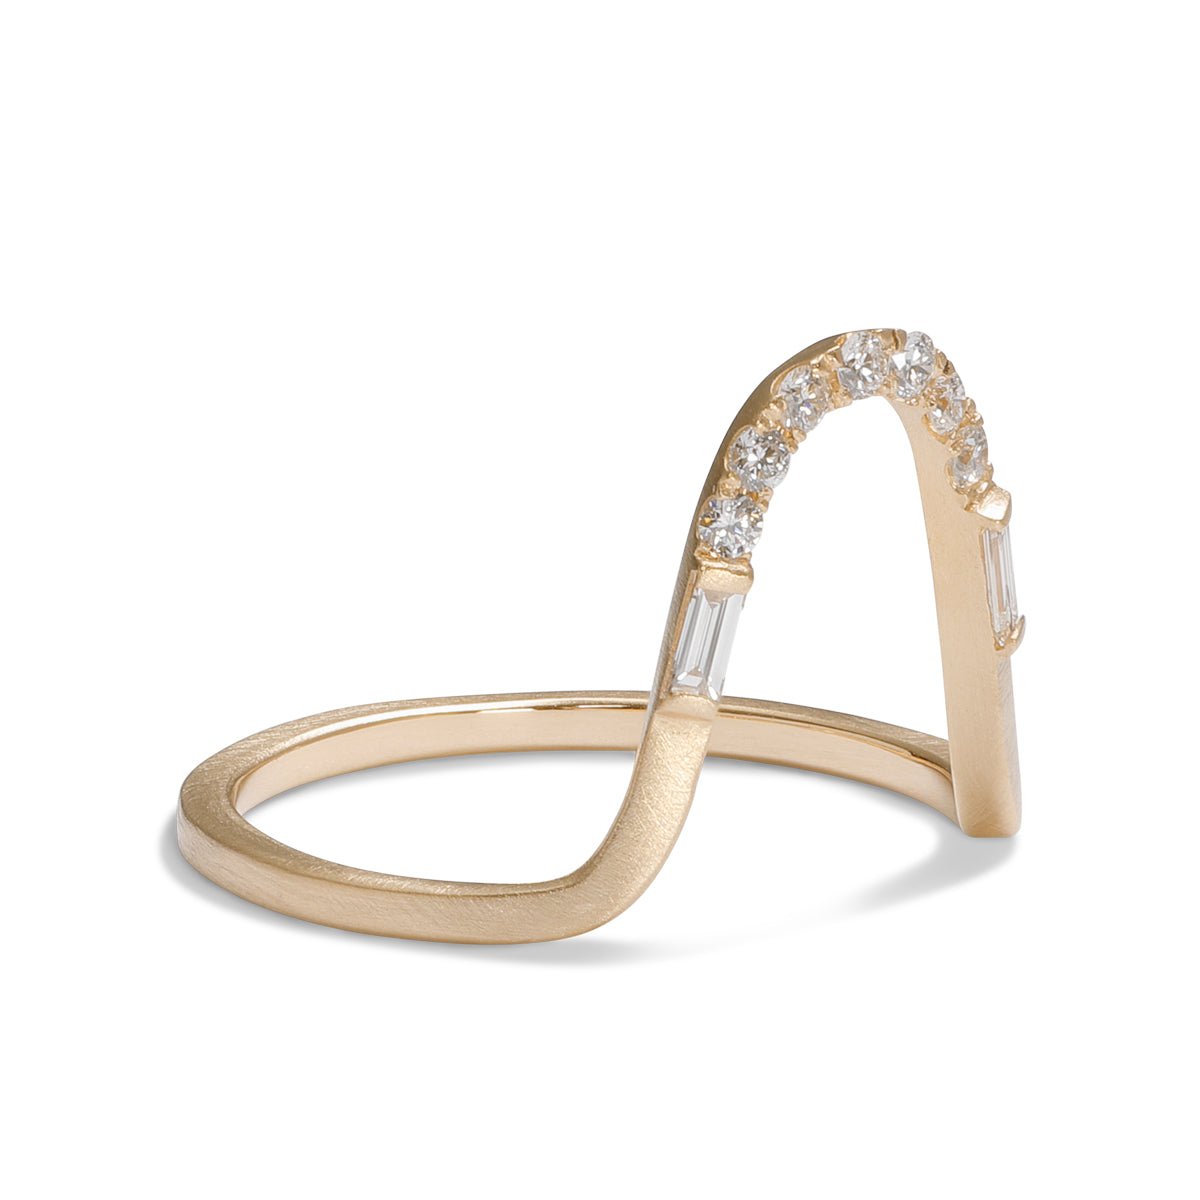 Arched stacking Levo ring. Features lab-grown diamonds in a pavé setting and a 14K recycled gold band.